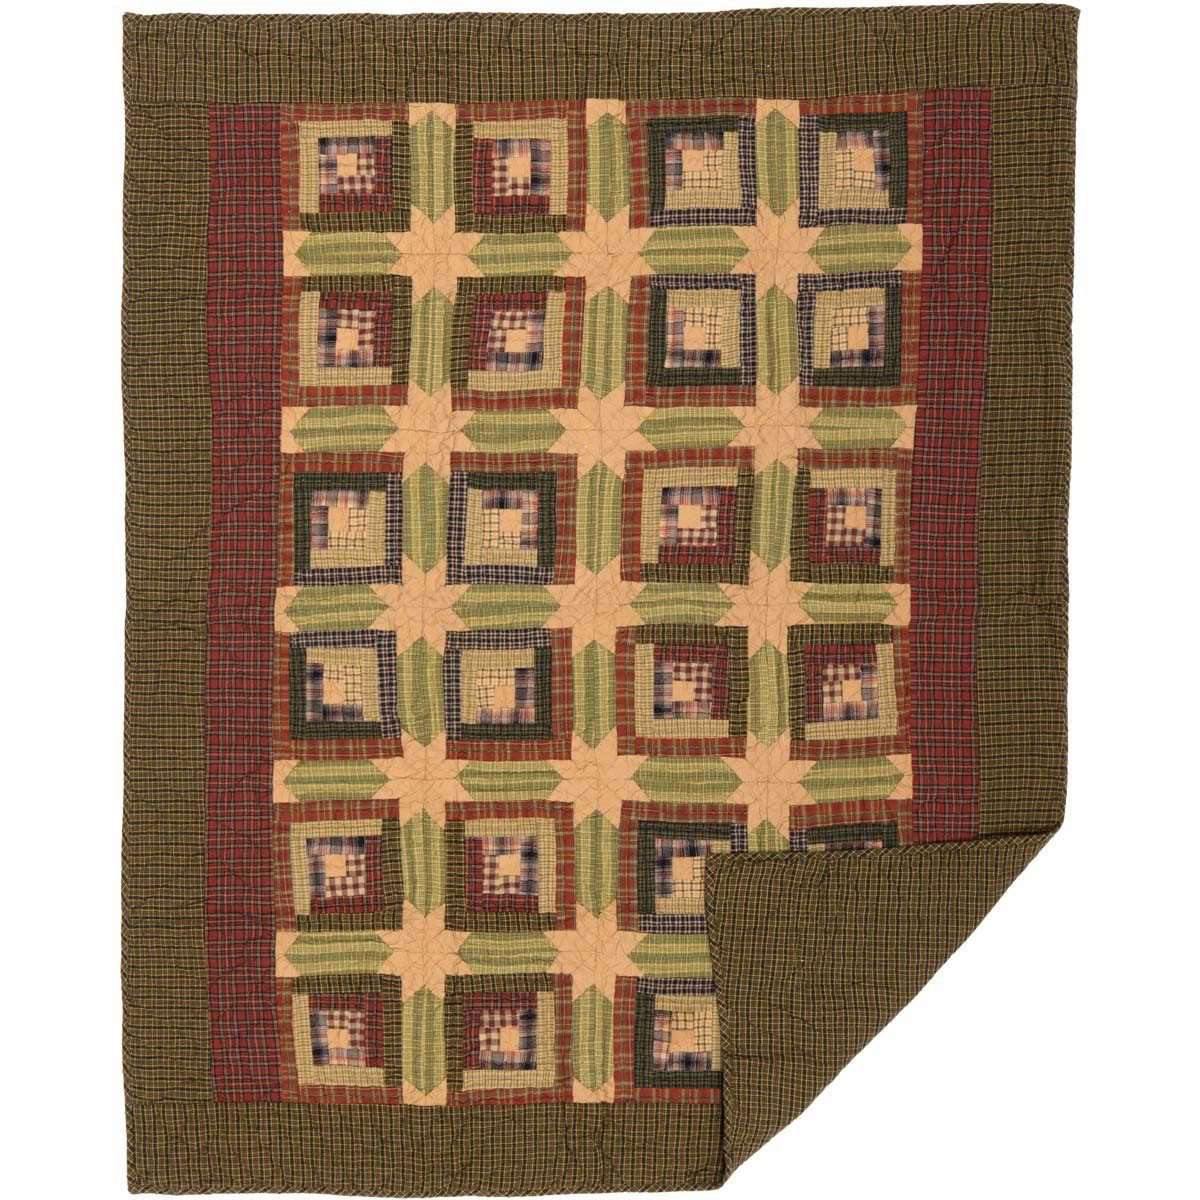 Tea Cabin Throw Quilted 60x50 VHC Brands full